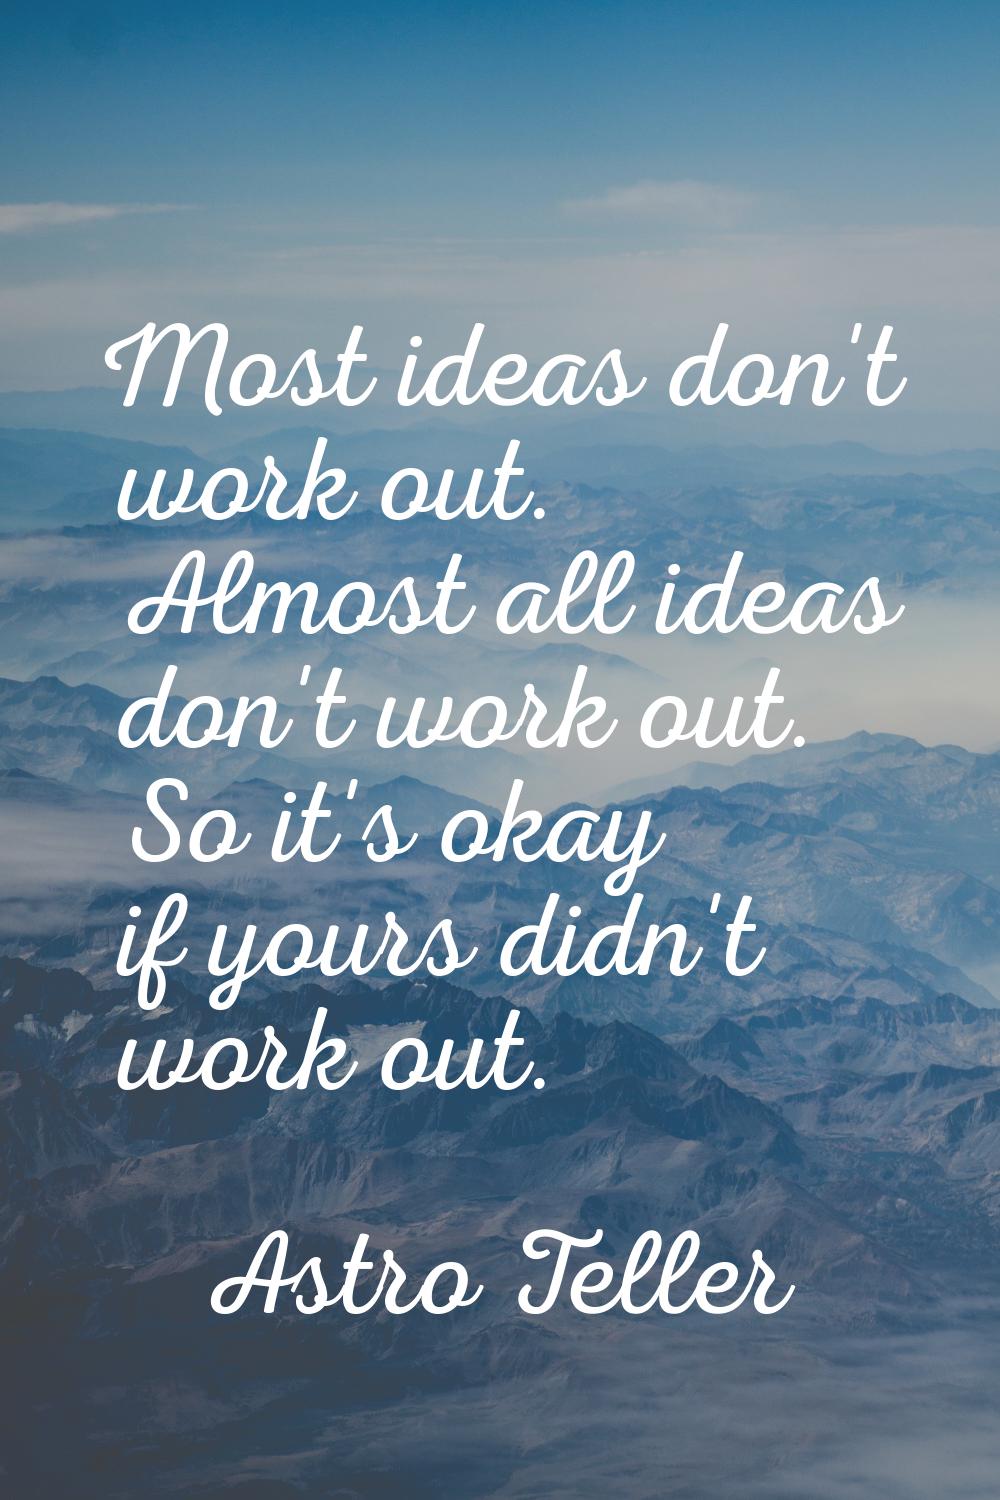 Most ideas don't work out. Almost all ideas don't work out. So it's okay if yours didn't work out.